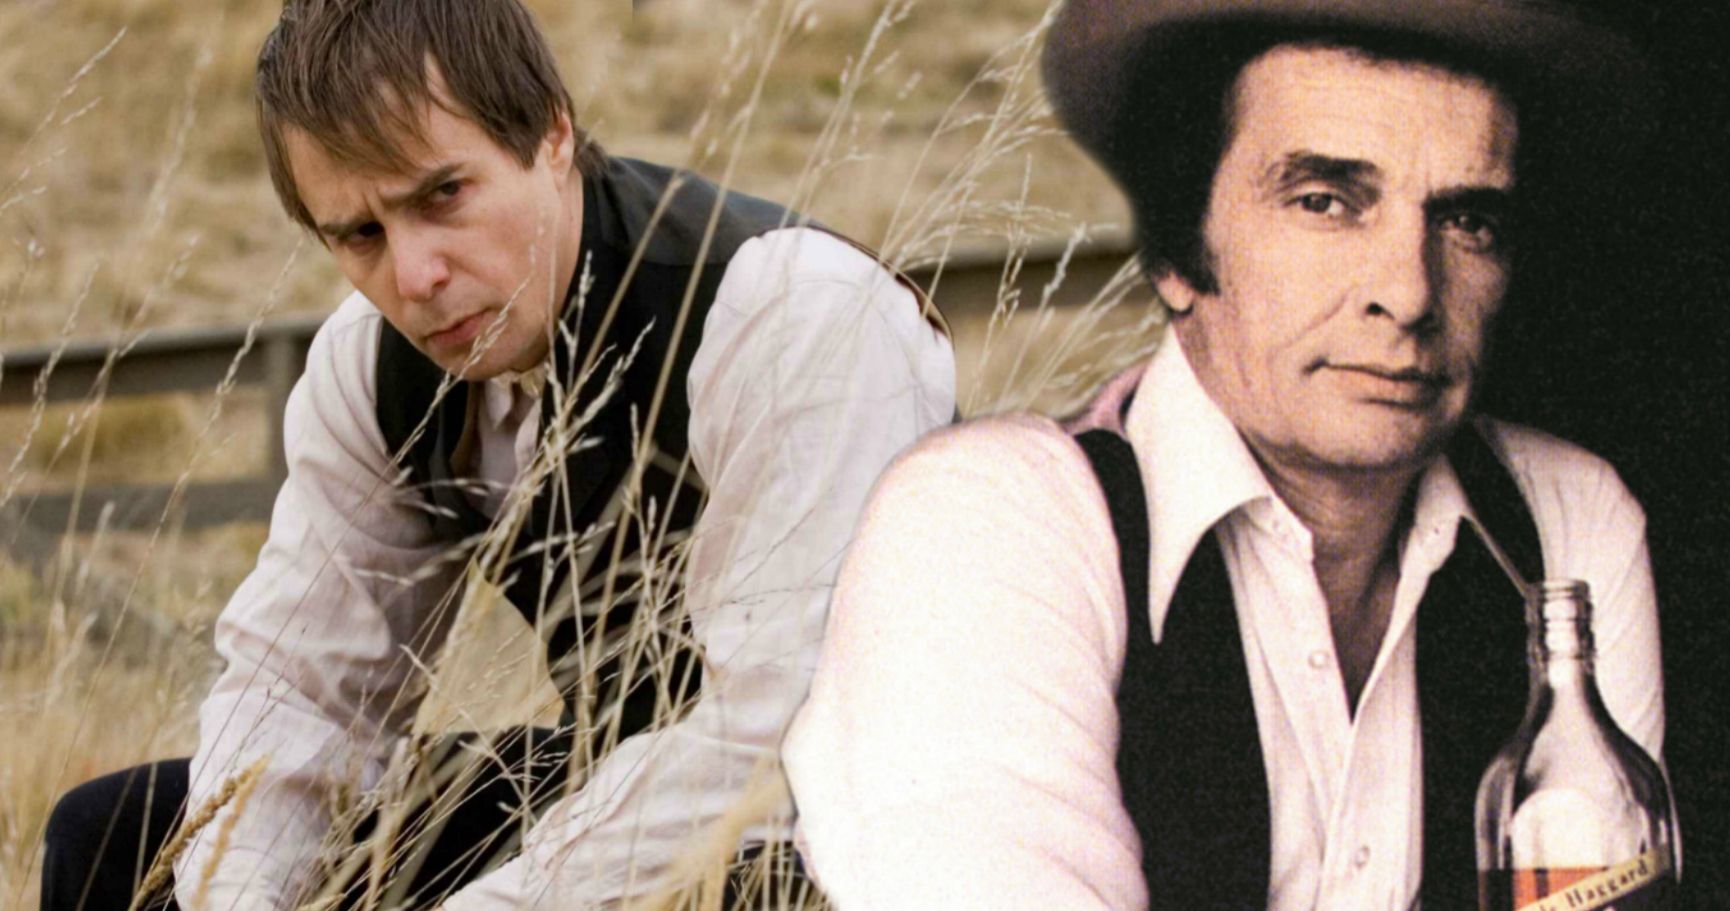 Sam Rockwell Is Merle Haggard in Upcoming Biopic from Amazon